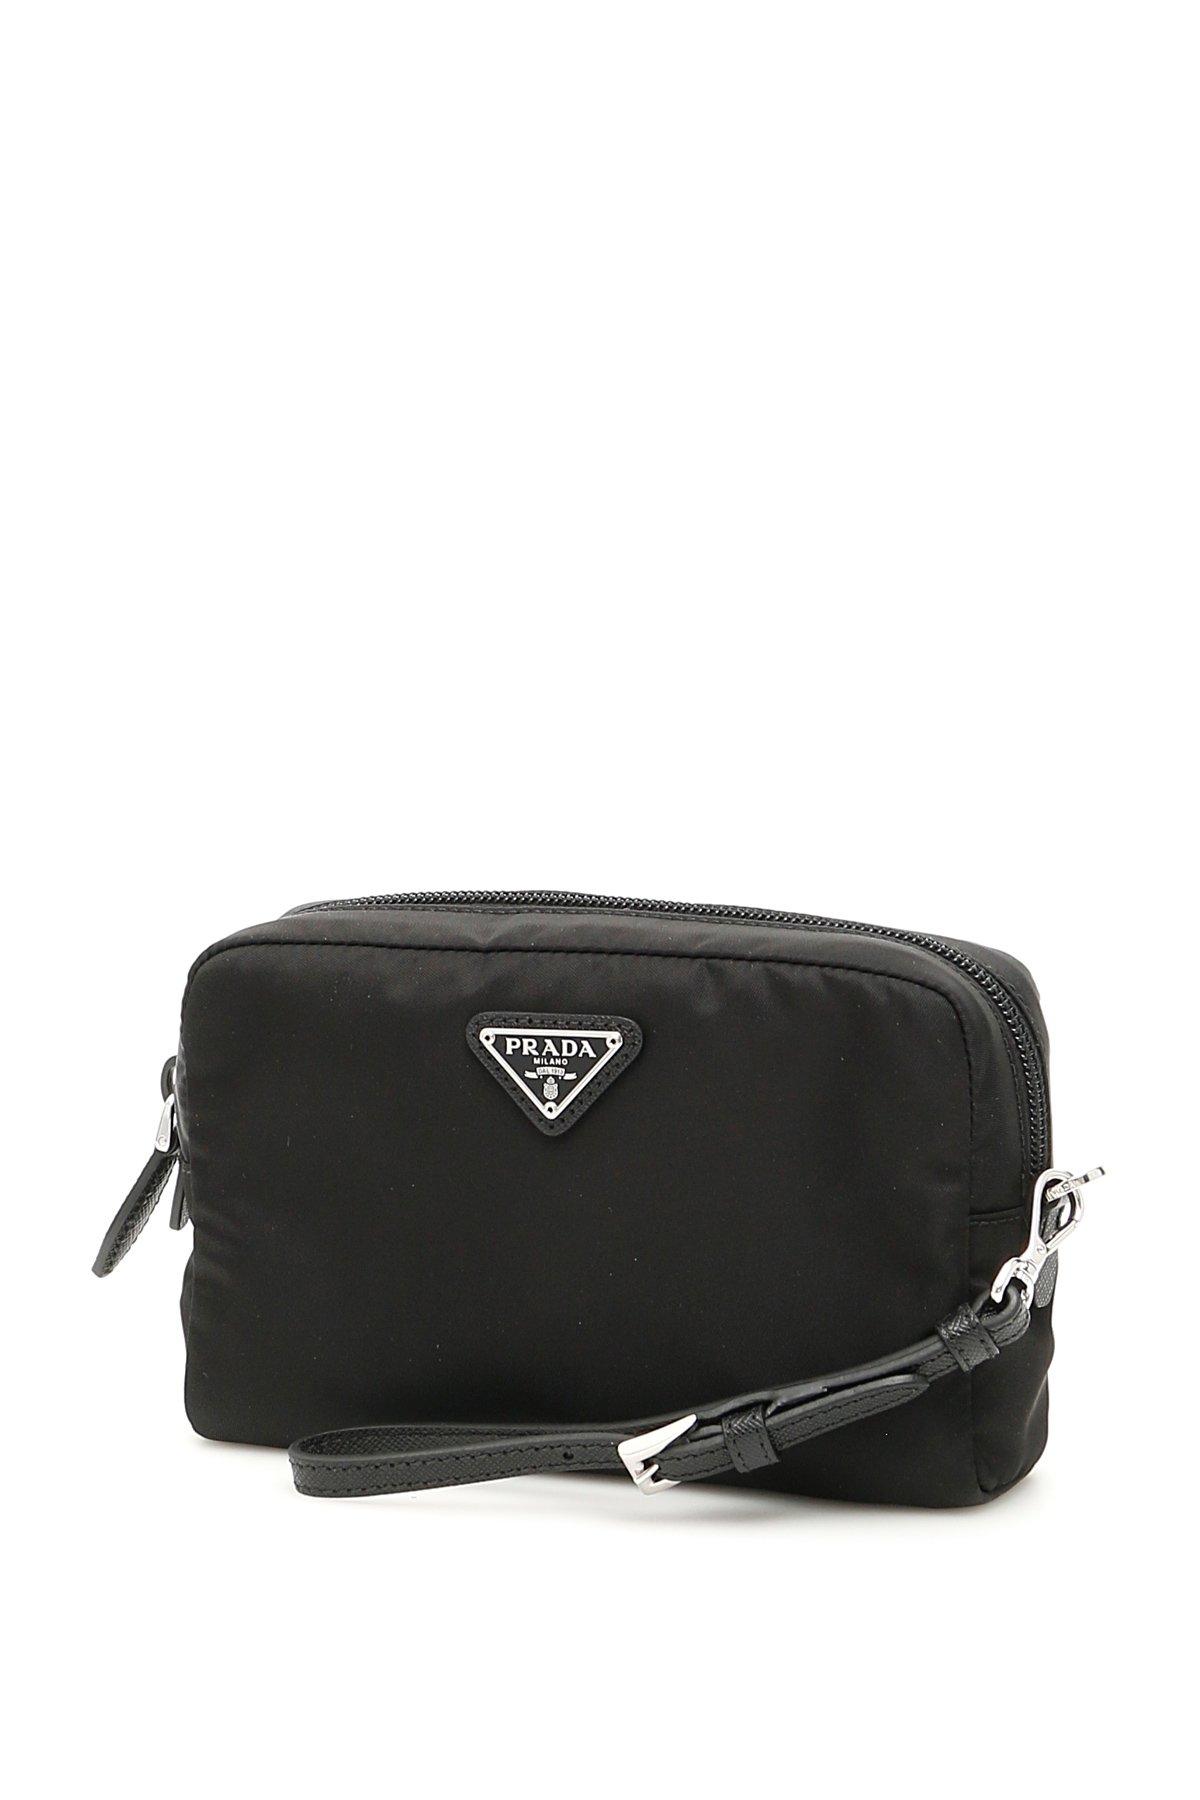 Prada Synthetic Nylon Pouch With Handle in Black - Lyst